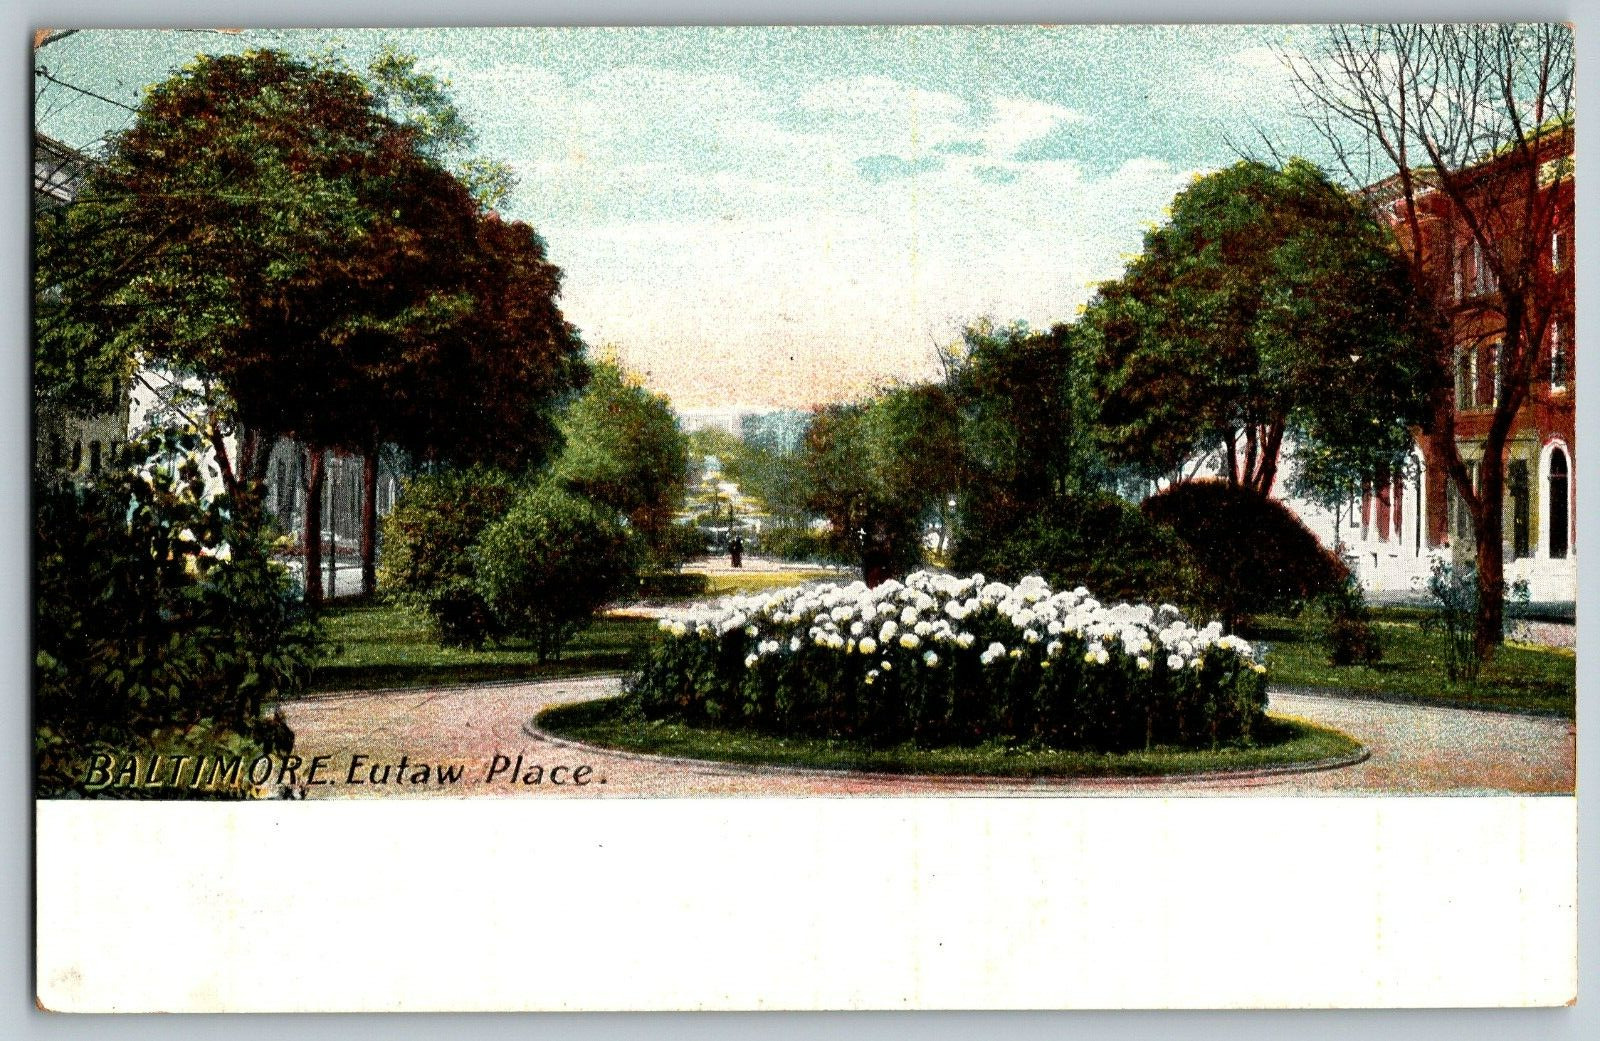 Baltimore, Maryland - Eulaw Place - Vintage Postcard - Unposted